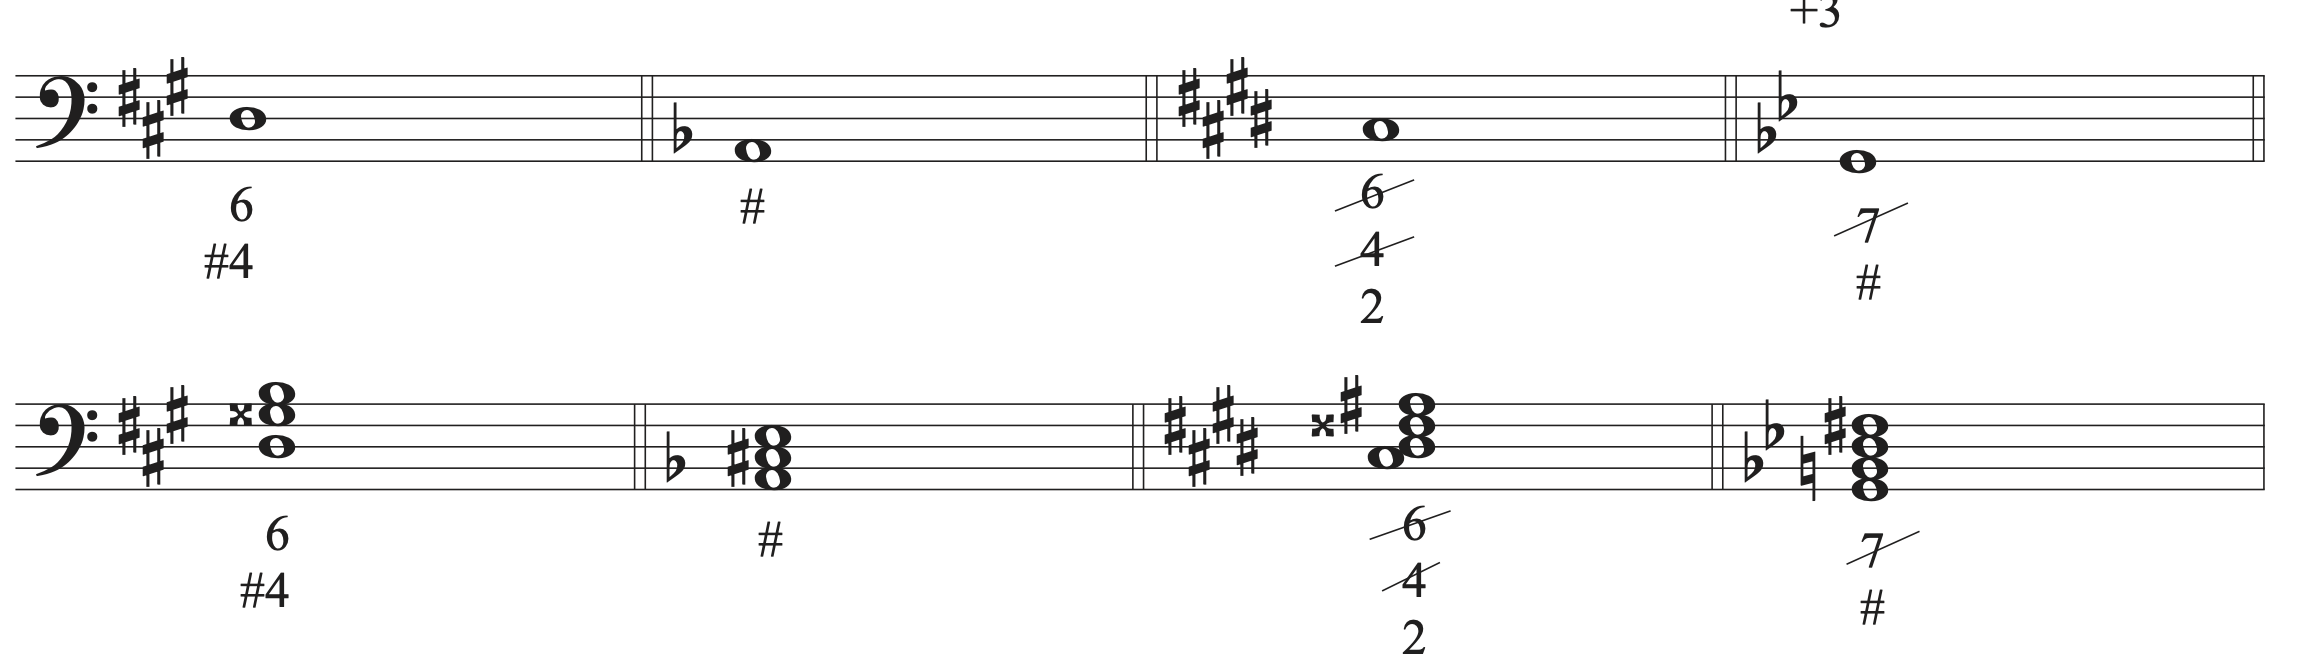 Example showing four bars with a given bass note and figured bass notation on the top line and the realization of the figured bass on the staff on bottom line.